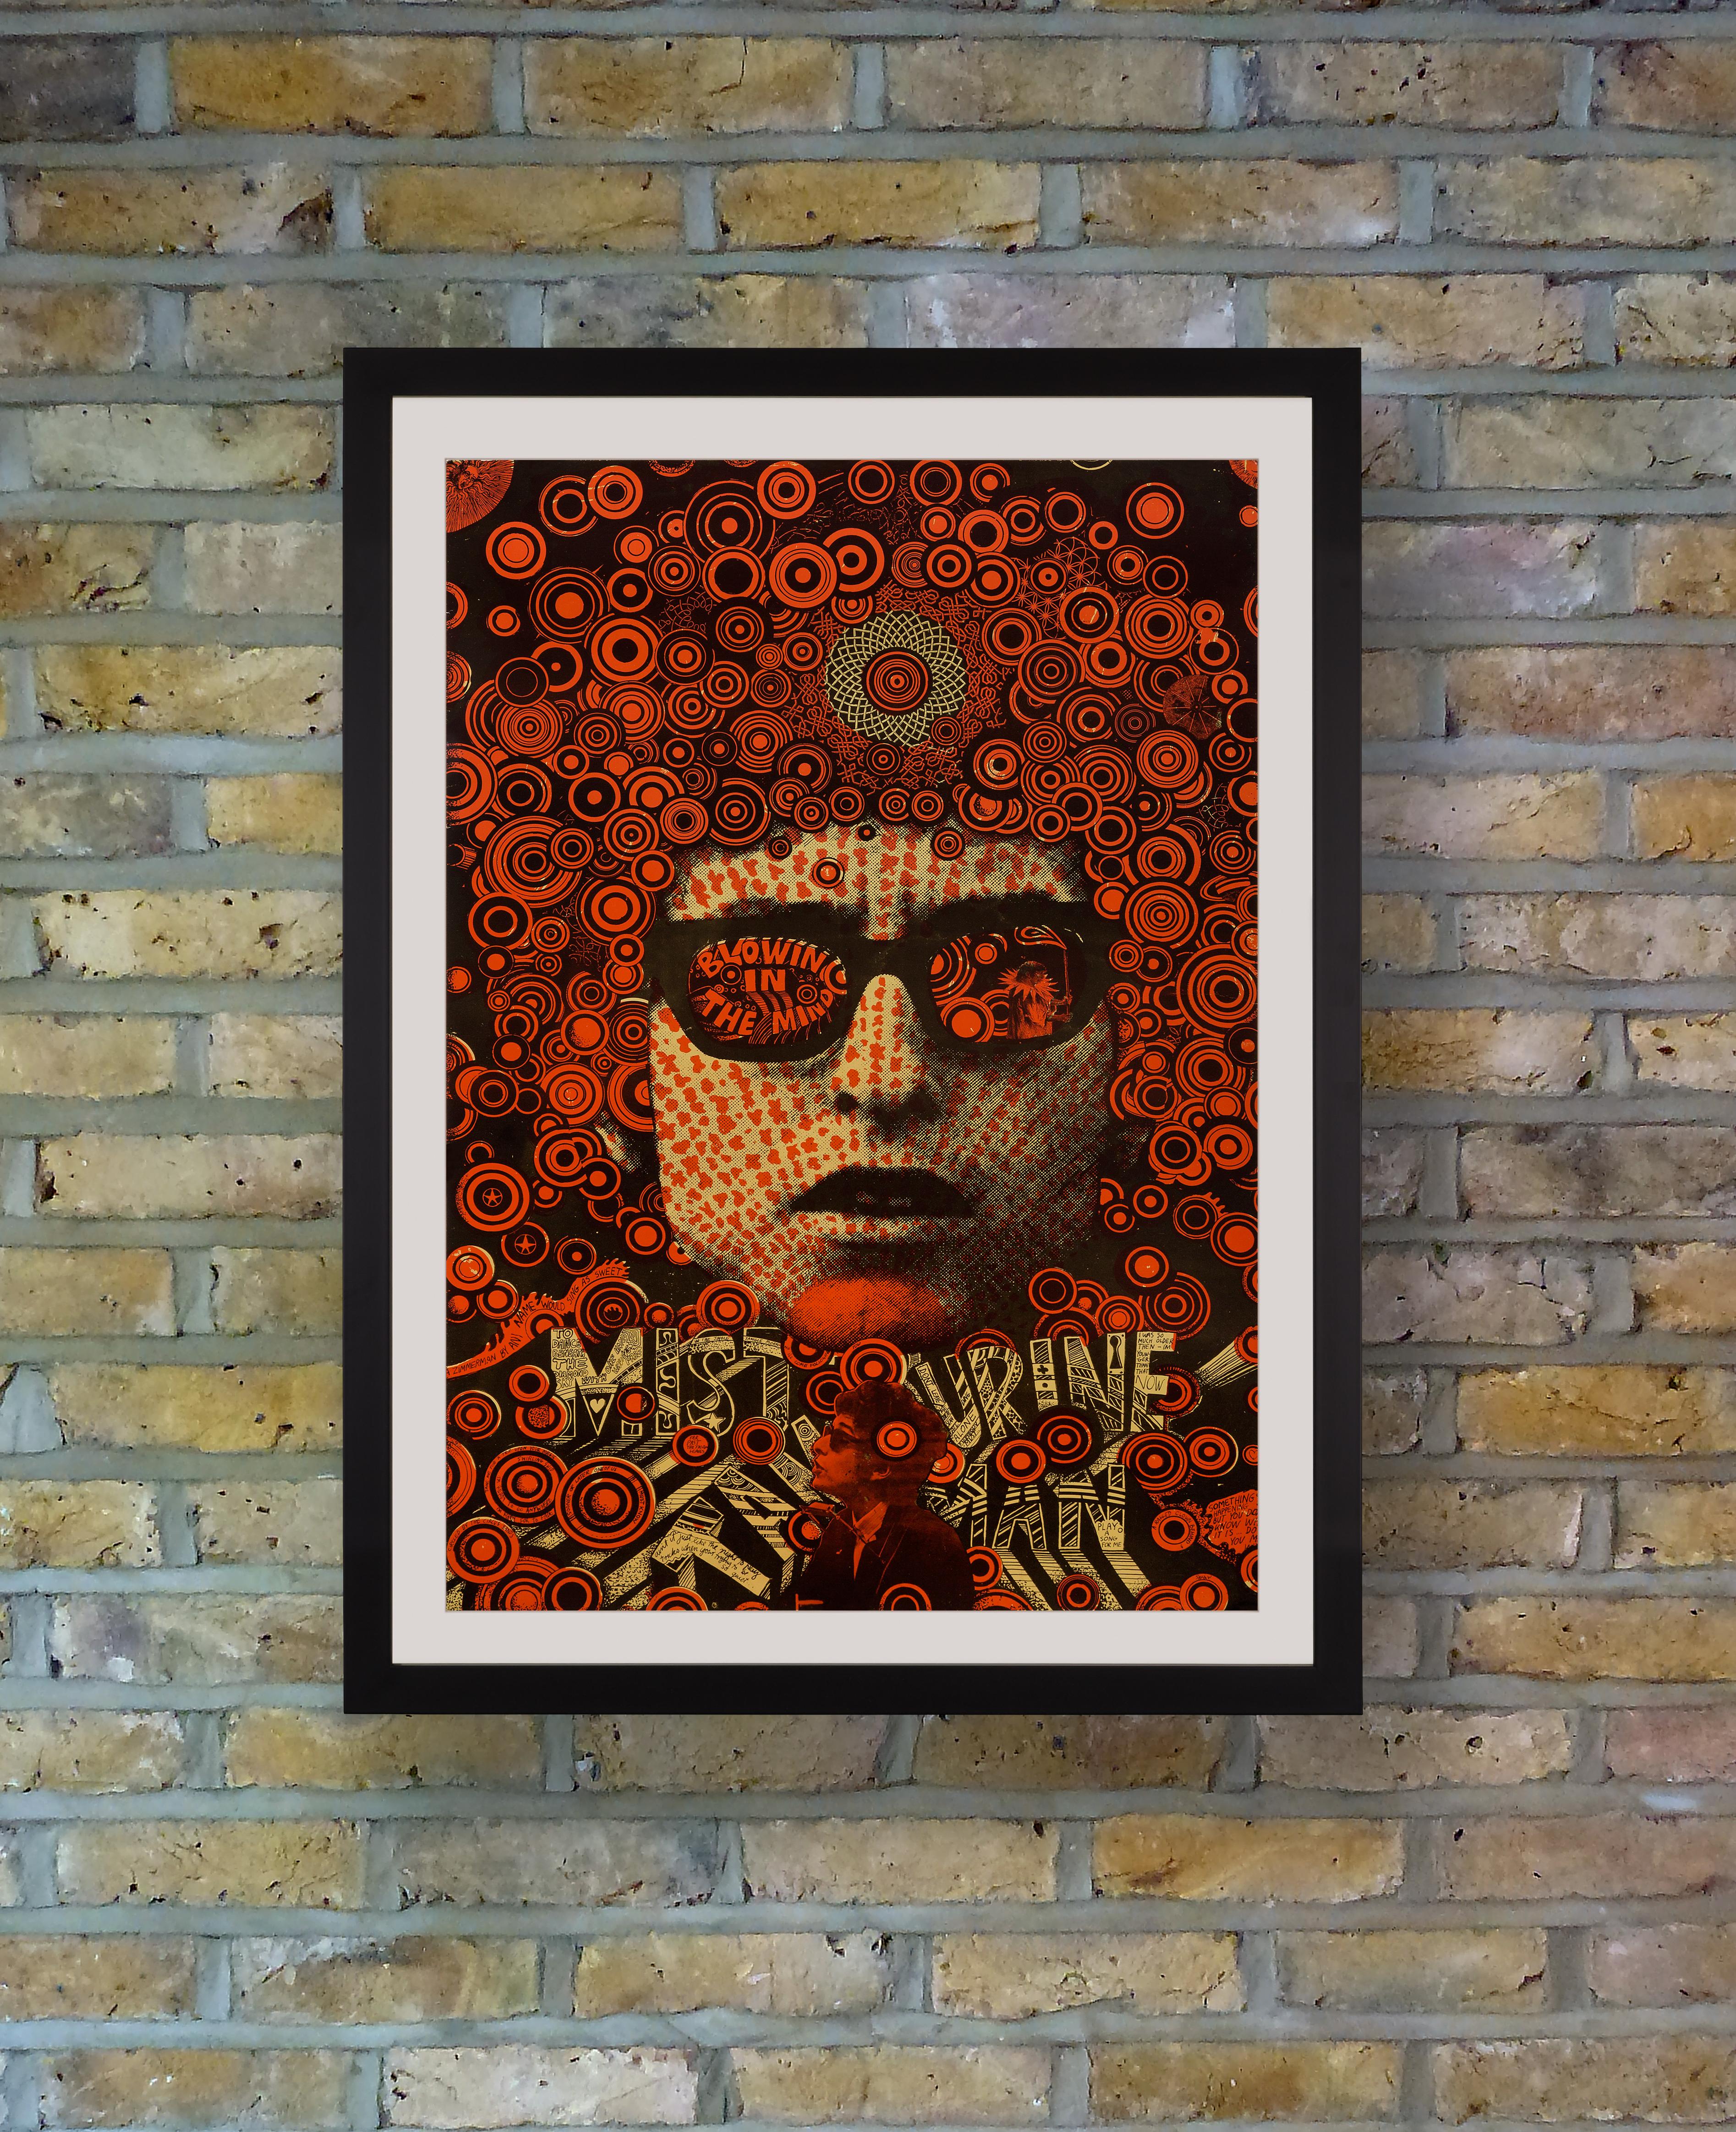 With its psychedelic fusion of music, color and hallucinogenic drugs, Martin Sharp's iconic poster of Bob Dylan captured the spirit of the Summer of Love in swinging London. Germaine Greer later declared 